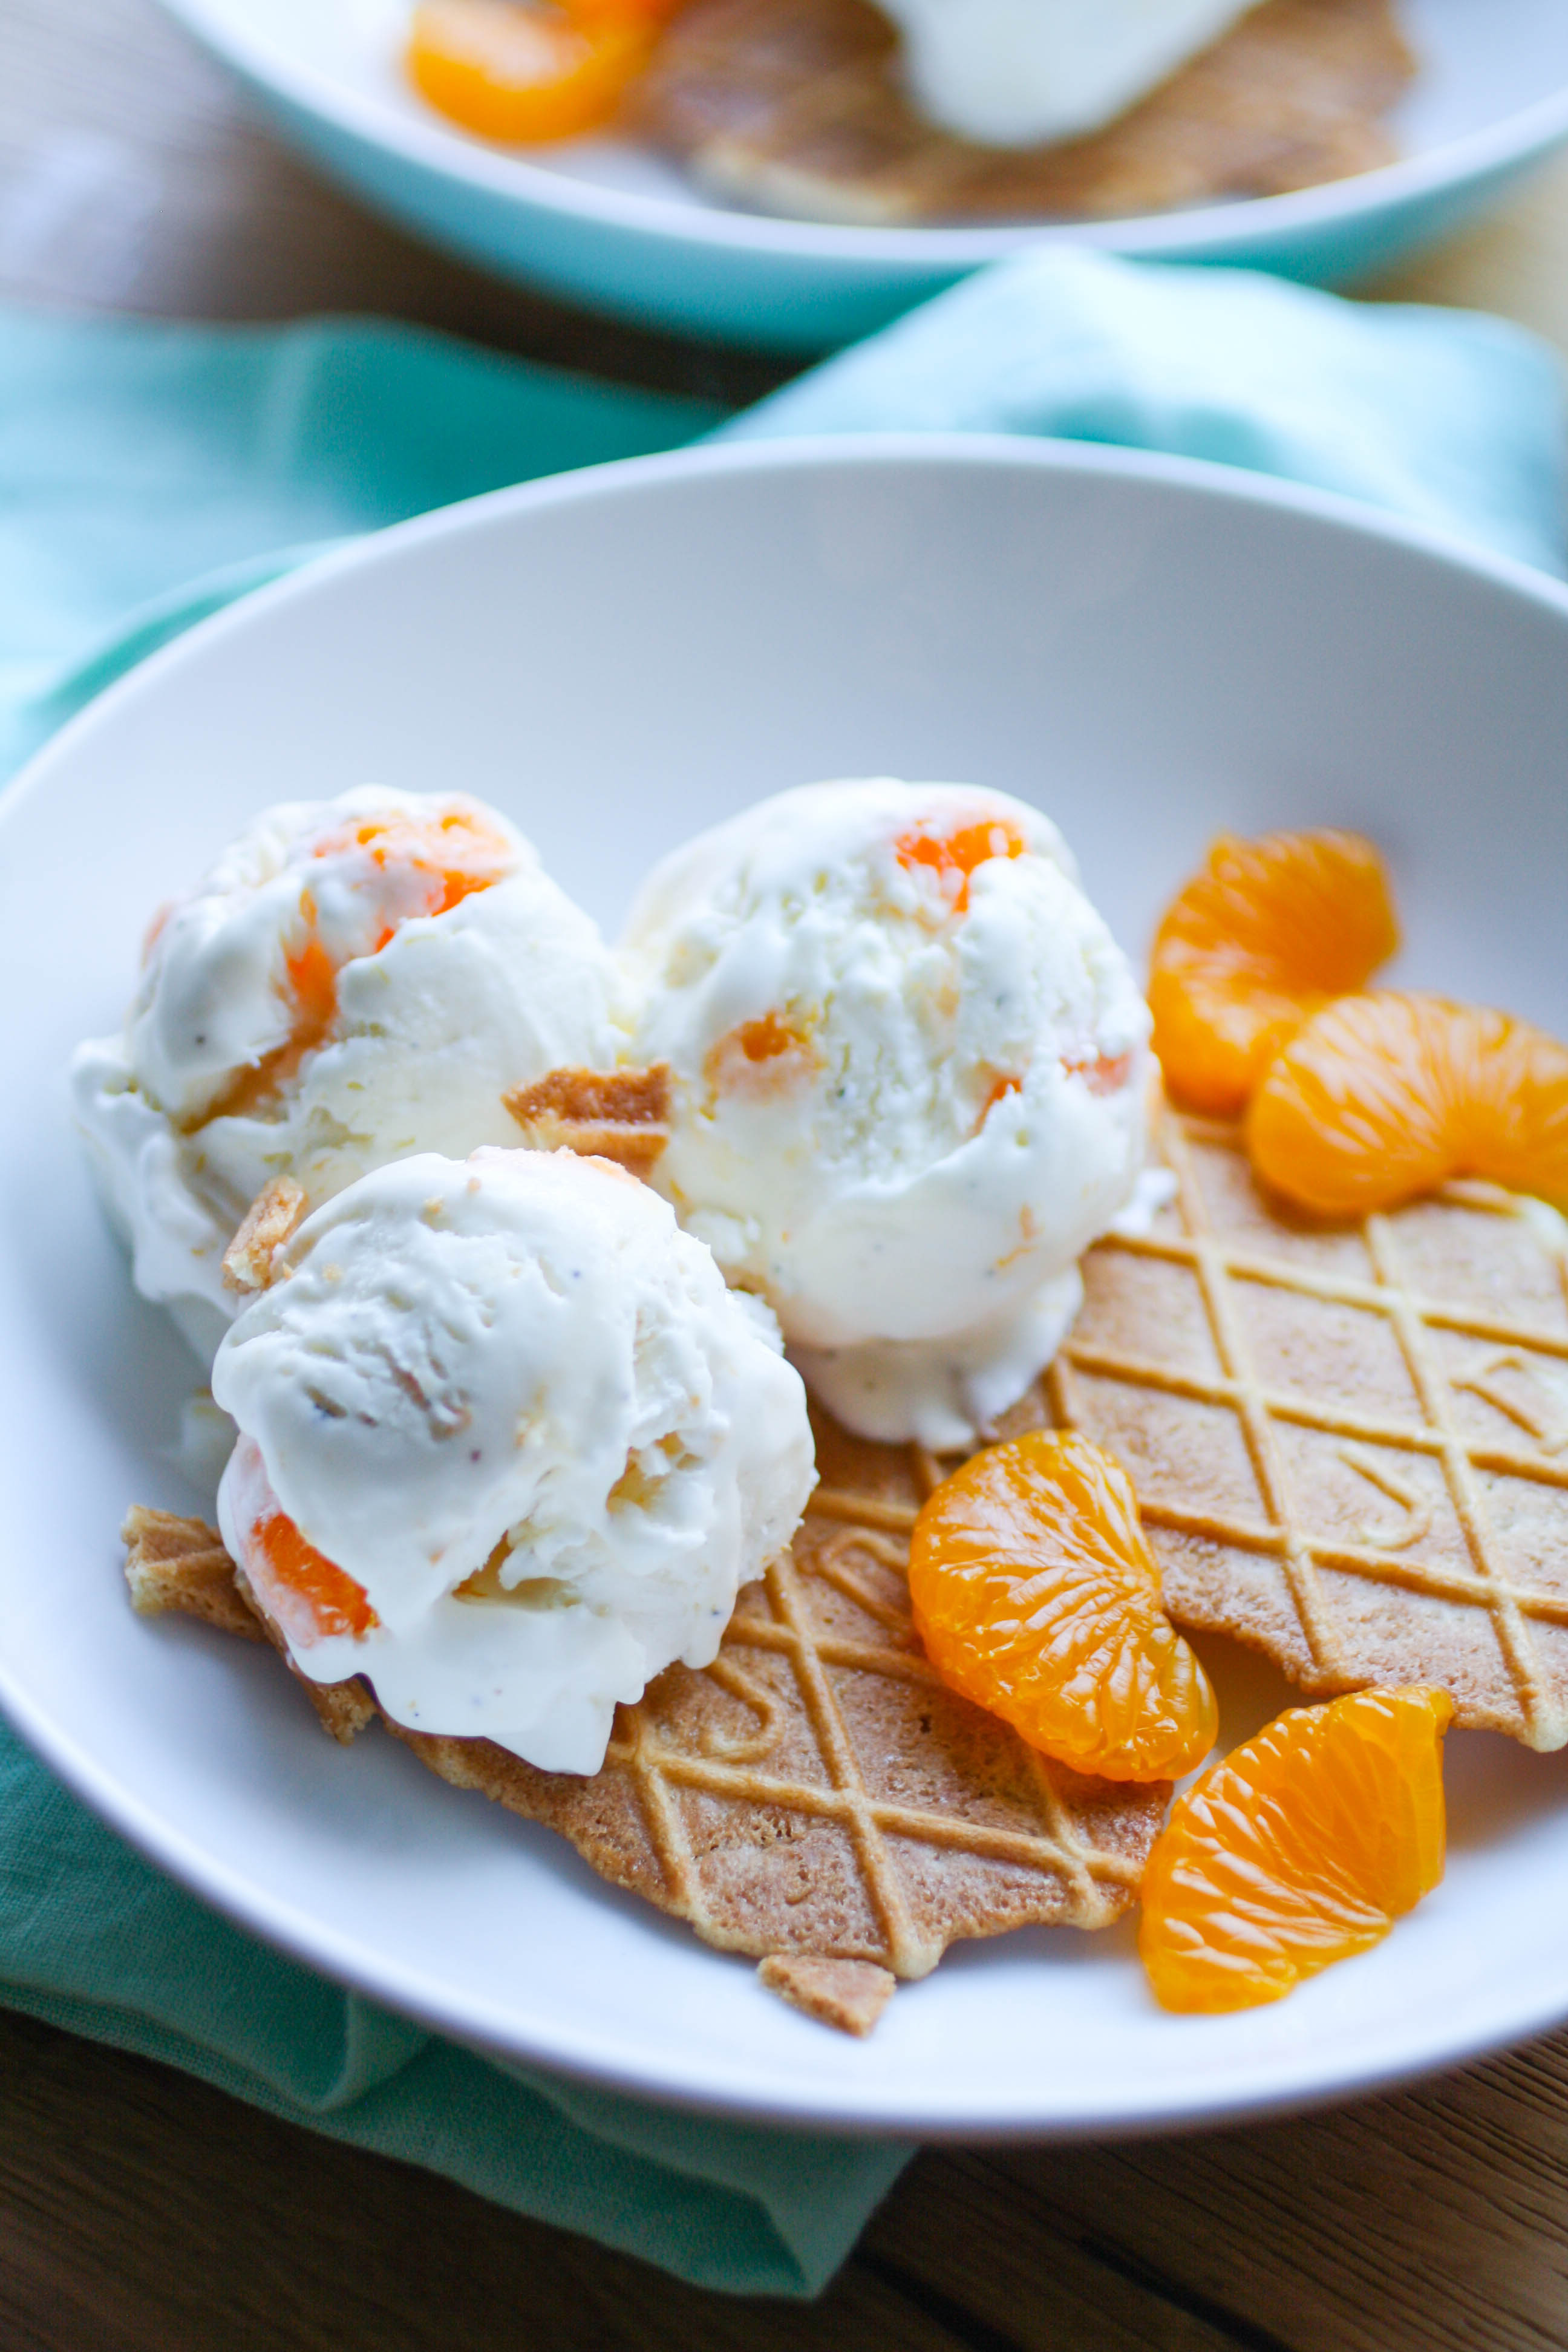 No Churn Orange-Cardamom Ice Cream is a lovely dessert. This treat is so easy to make, and who wouldn't love an ice cream treat like this!